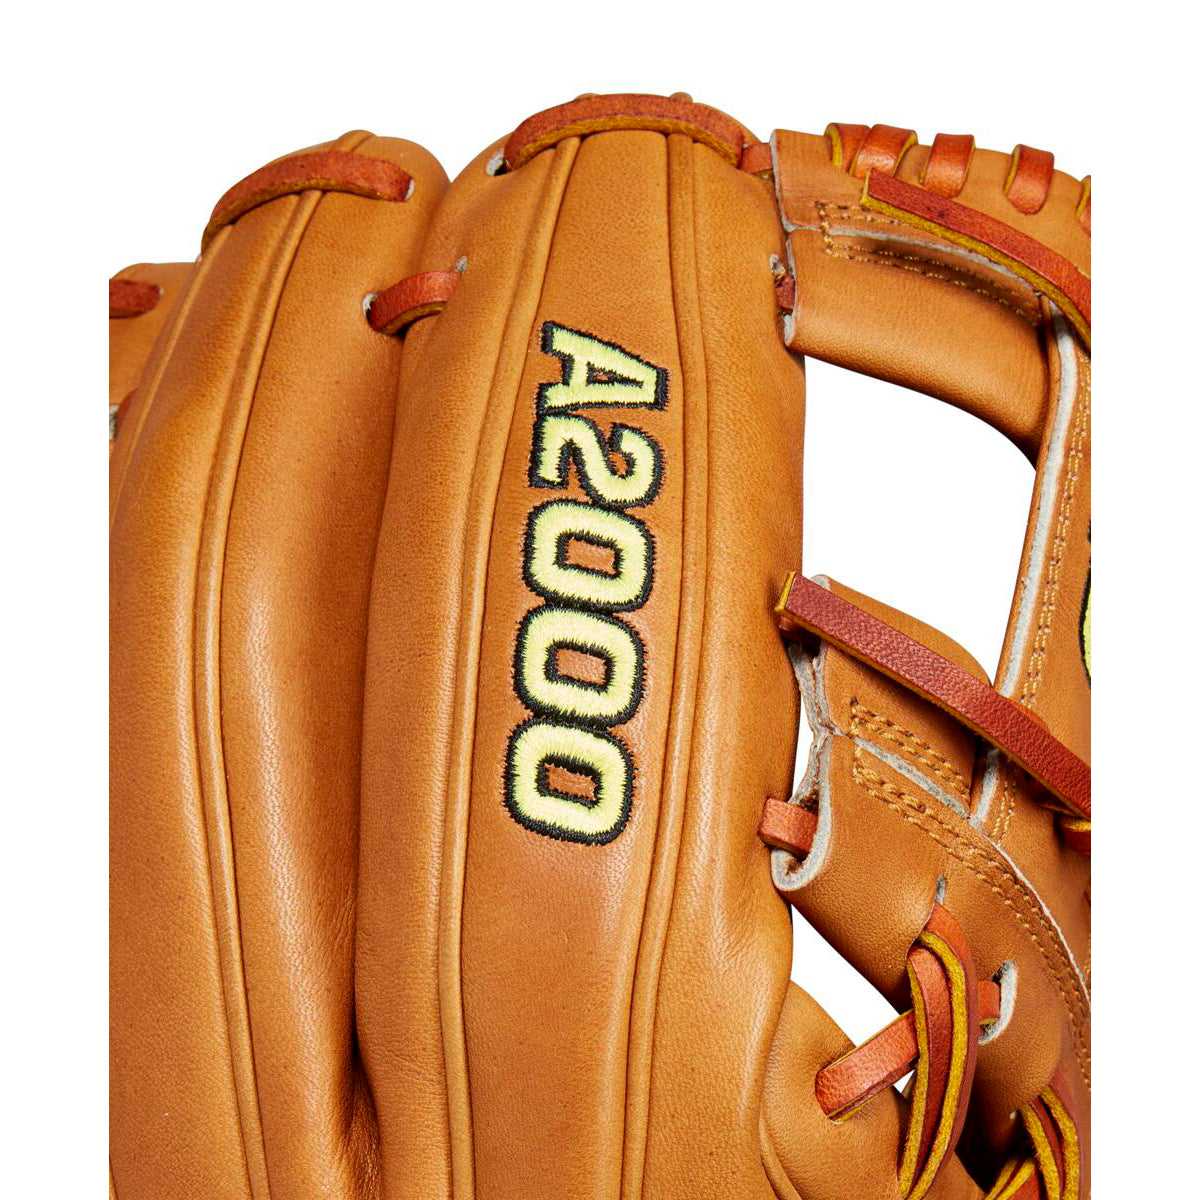 Wilson A2000 1786 11.50&quot; Glove Day Series Infield Glove WBW102073115 - Saddle Tan - HIT a Double